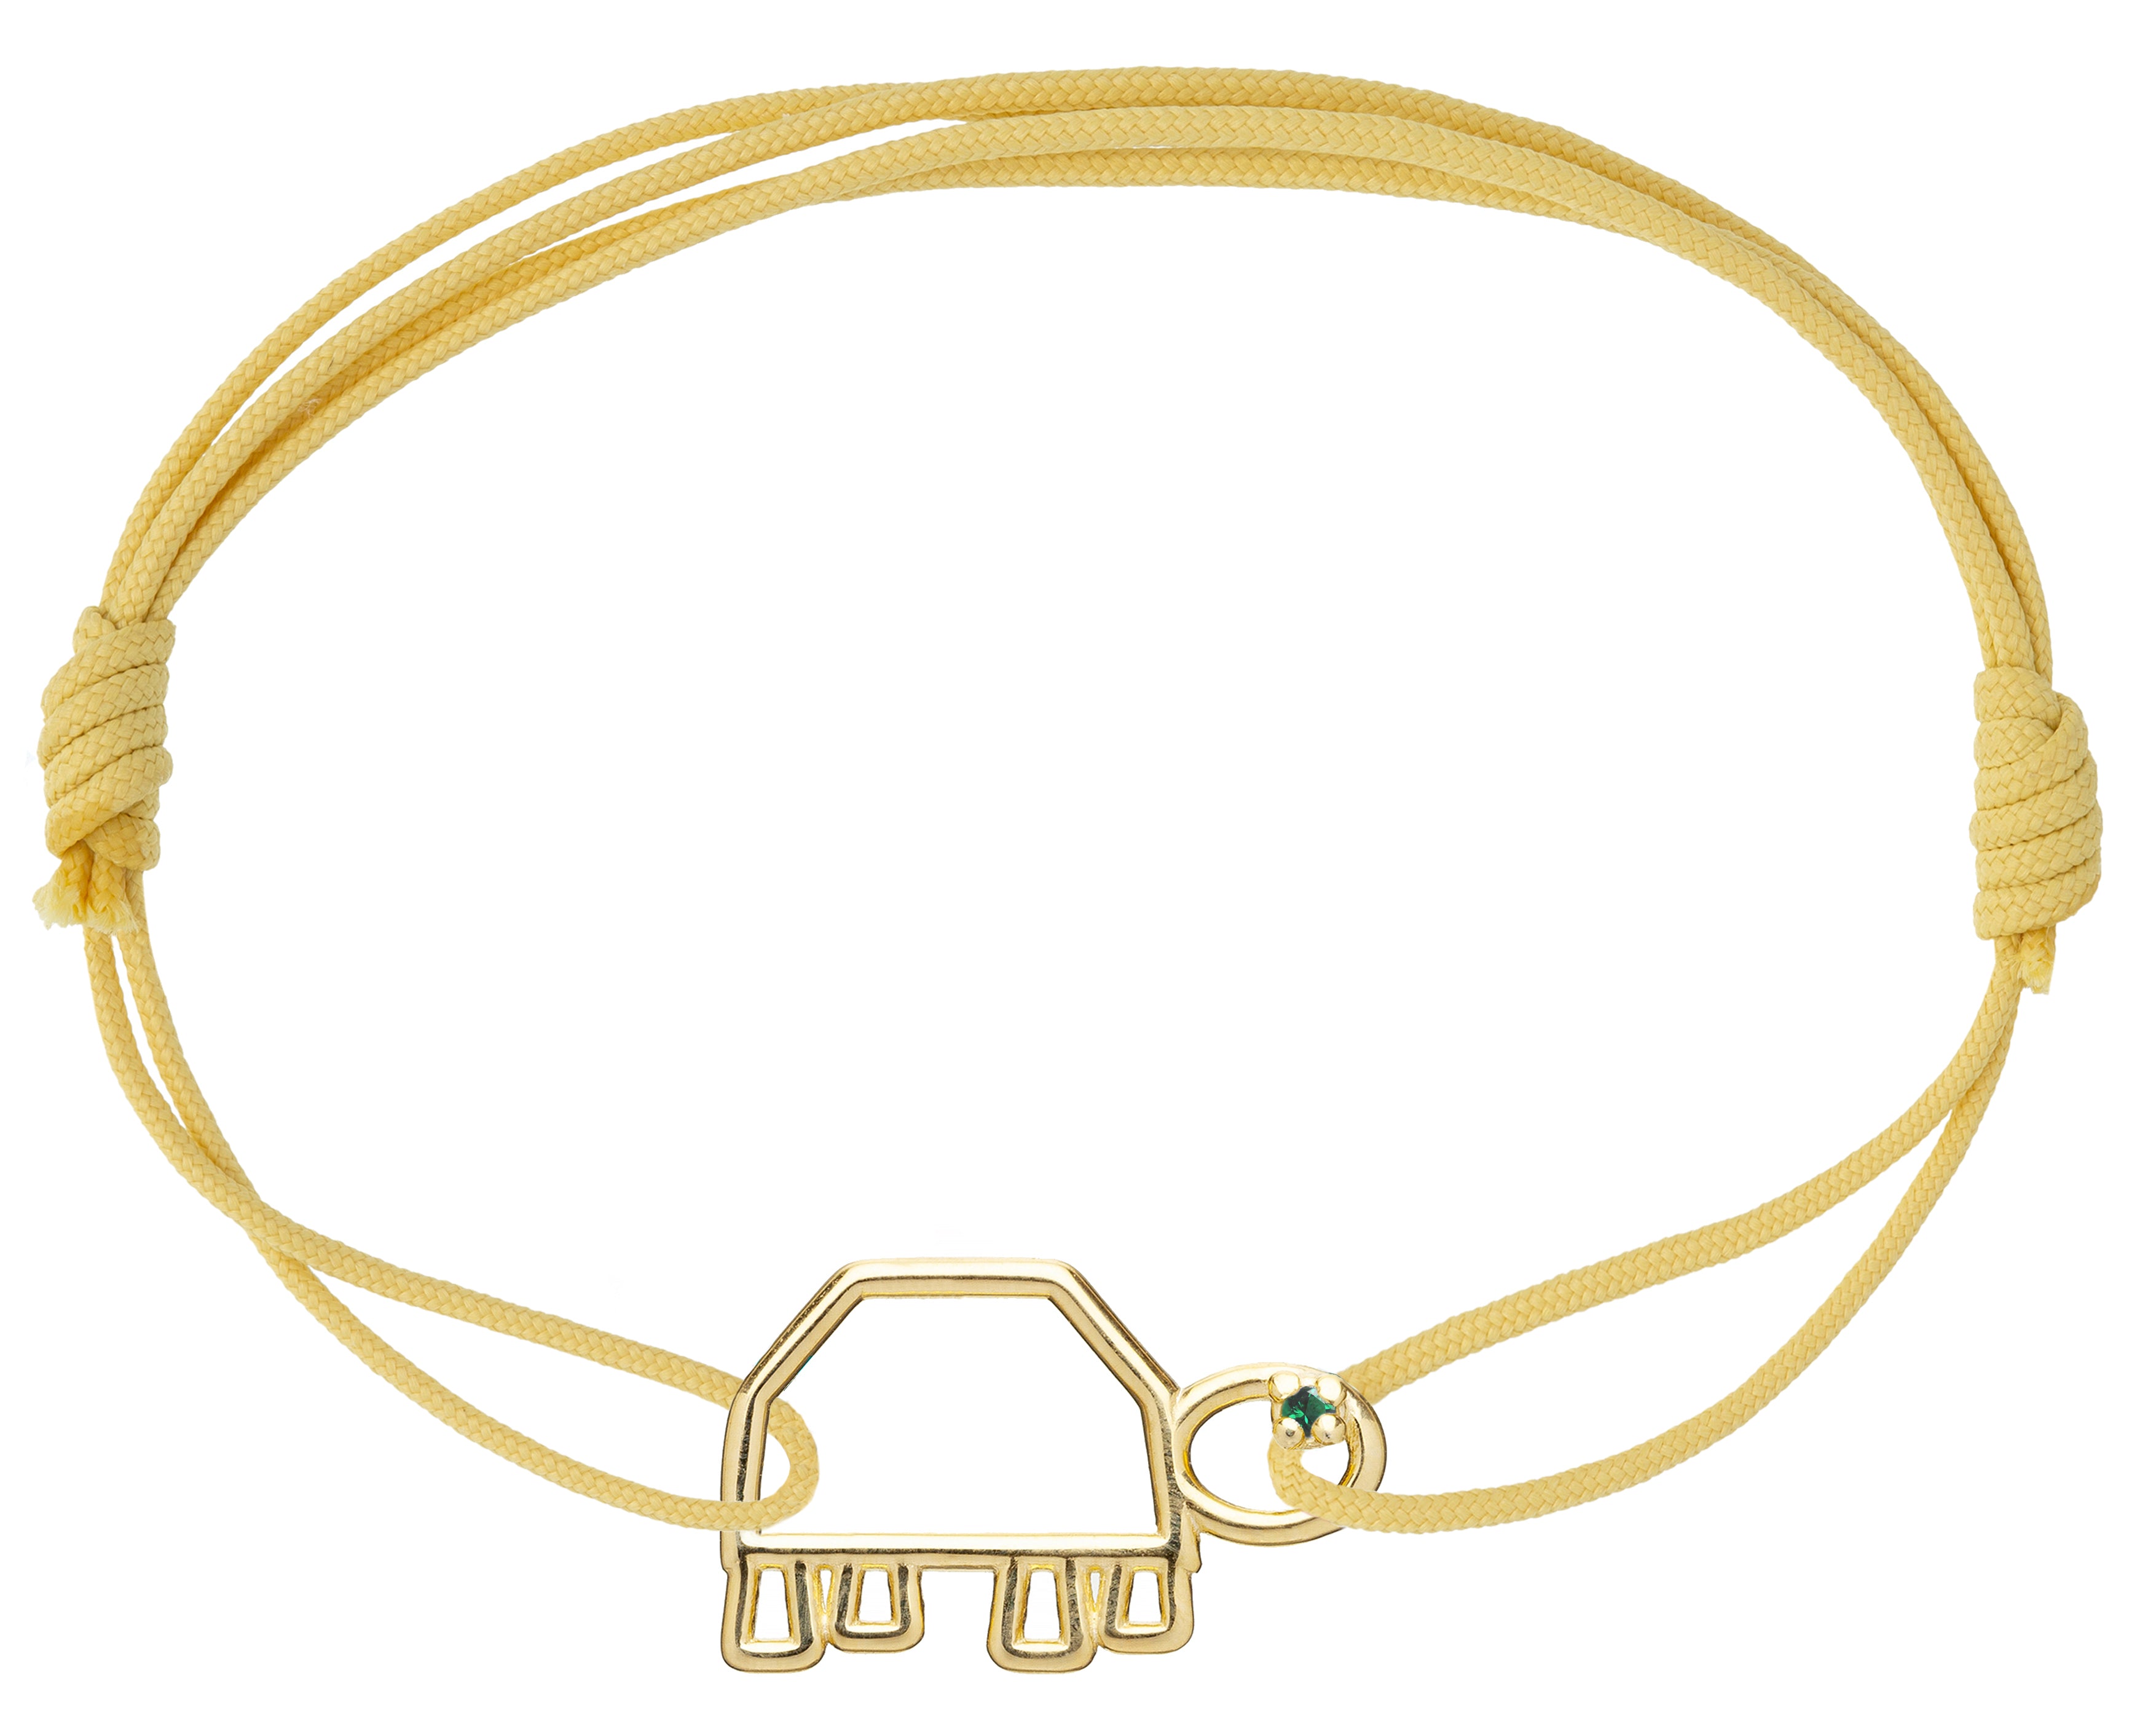 Yellow eco cord bracelet with a small turtle shaped gold pendant with an emerald eye